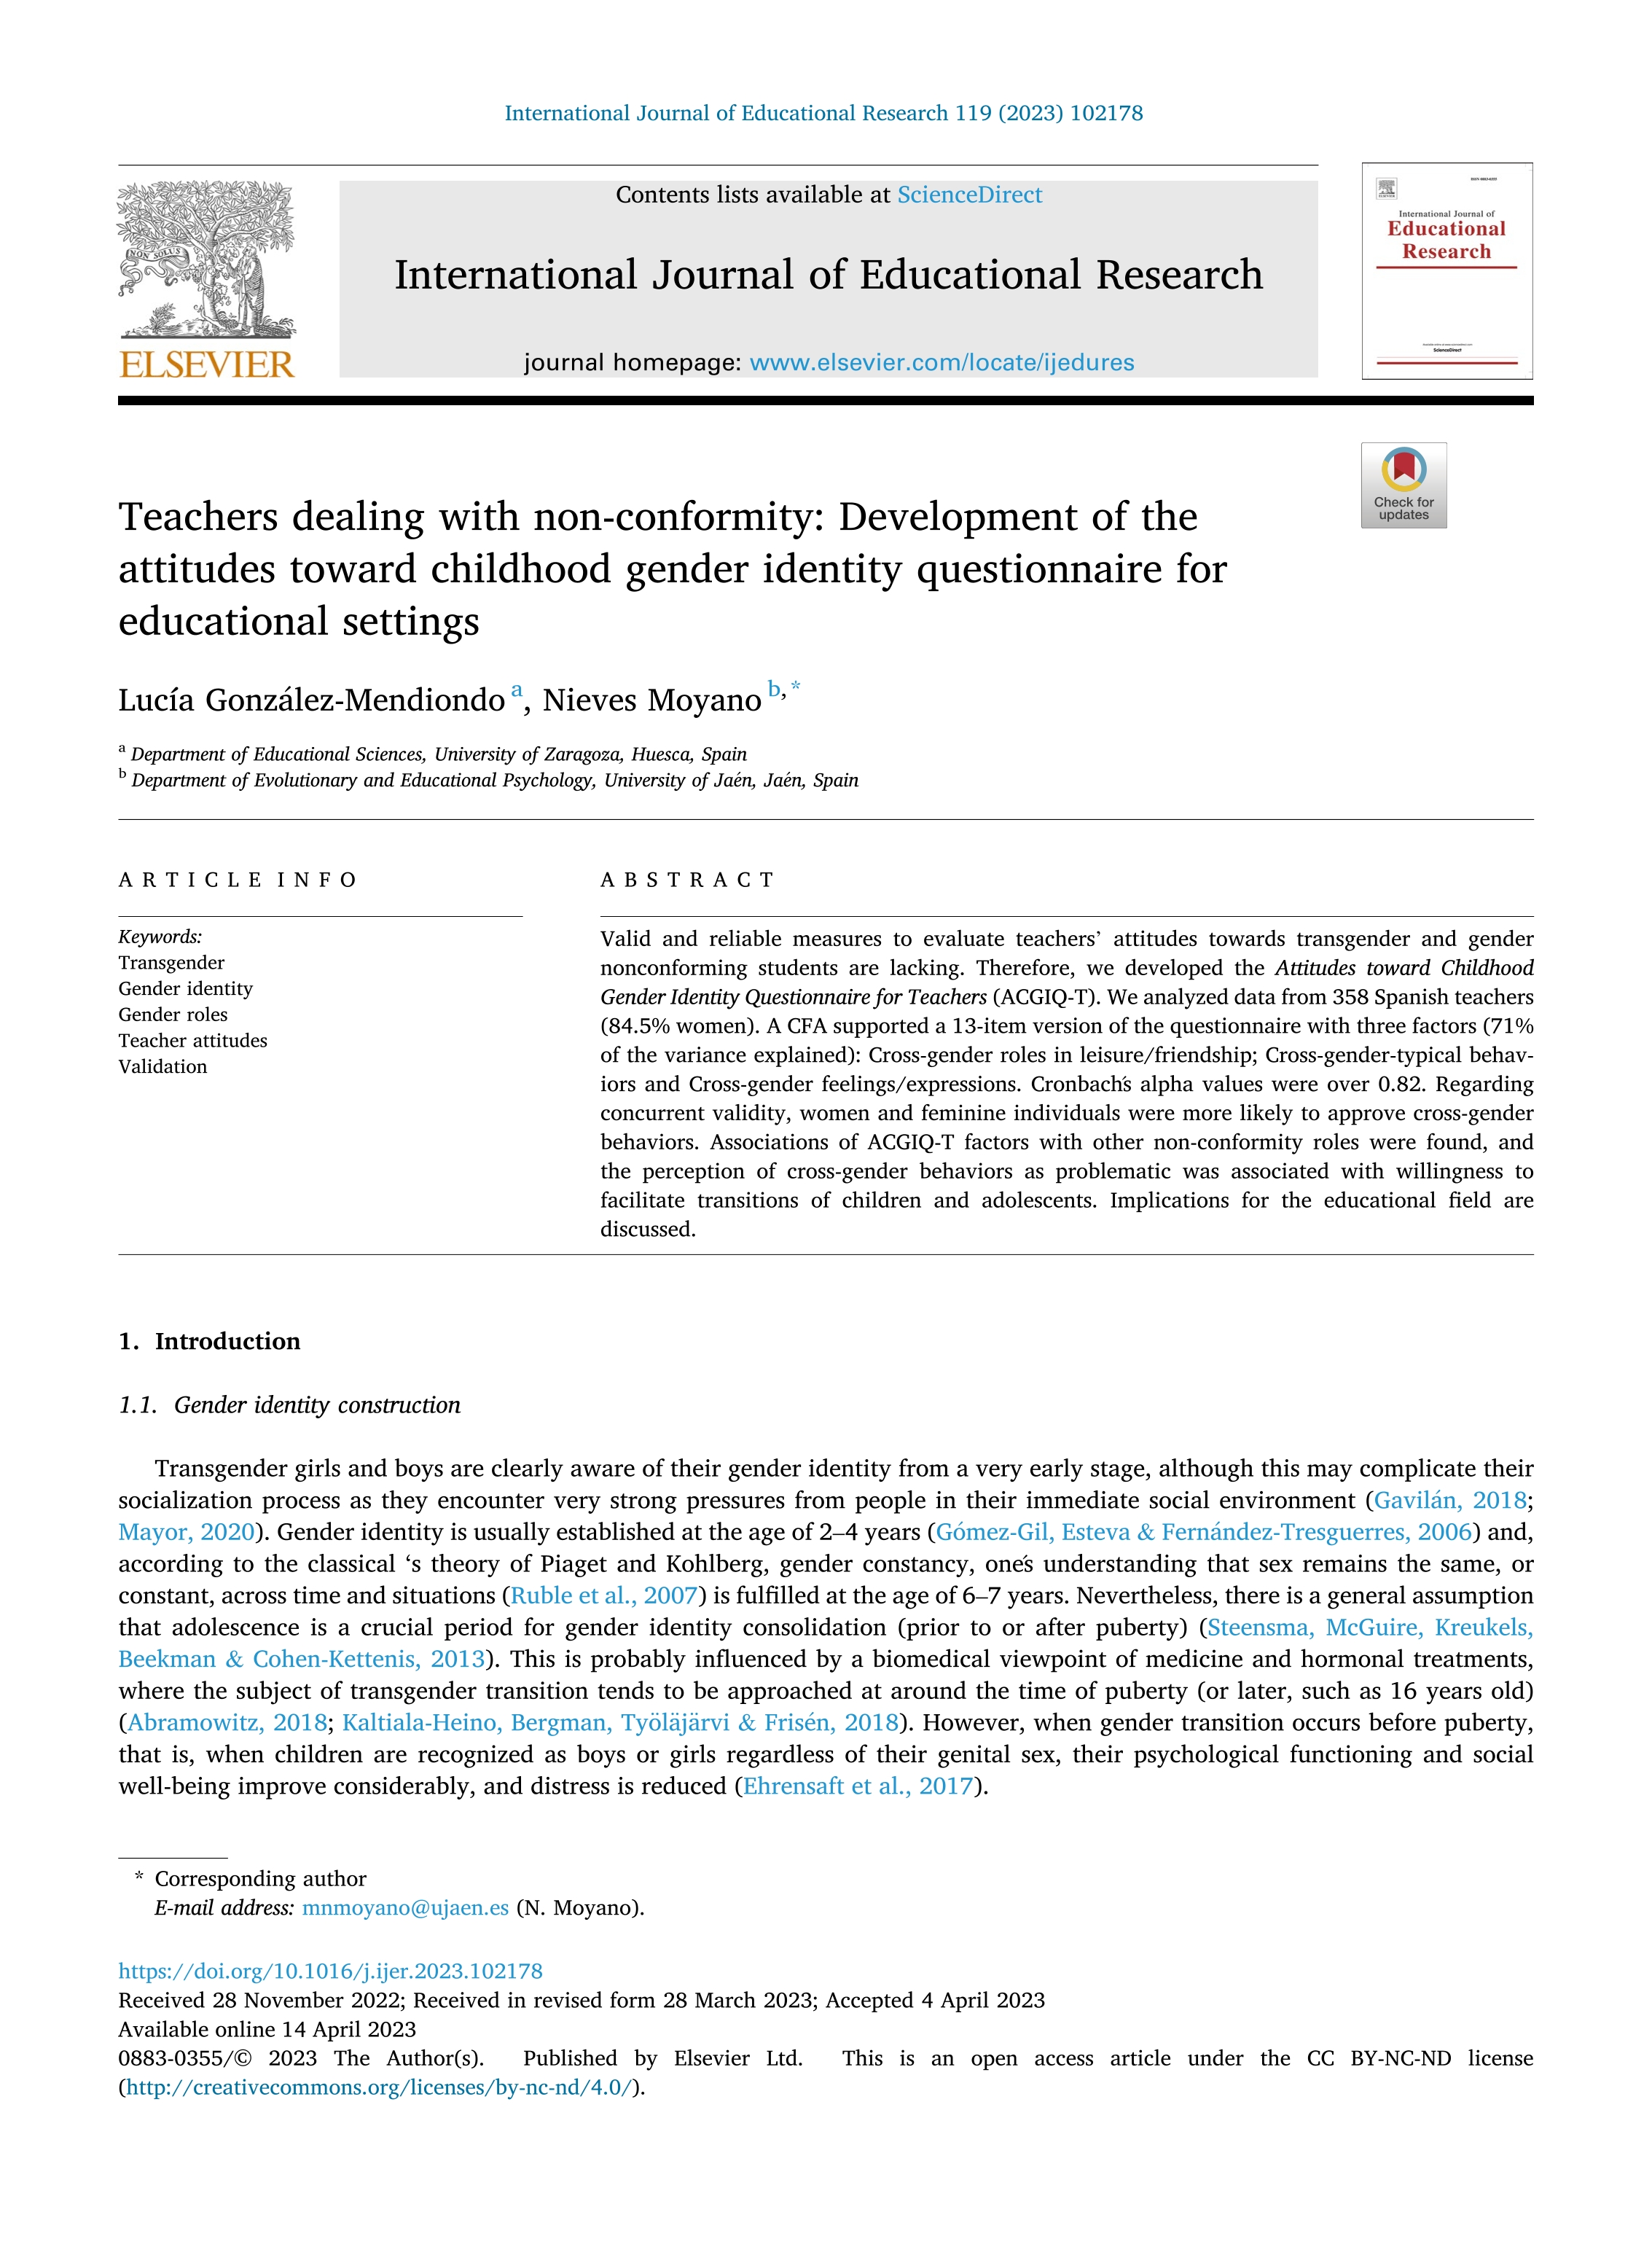 Teachers dealing with non-conformity: Development of the attitudes toward childhood gender identity questionnaire for educational settings